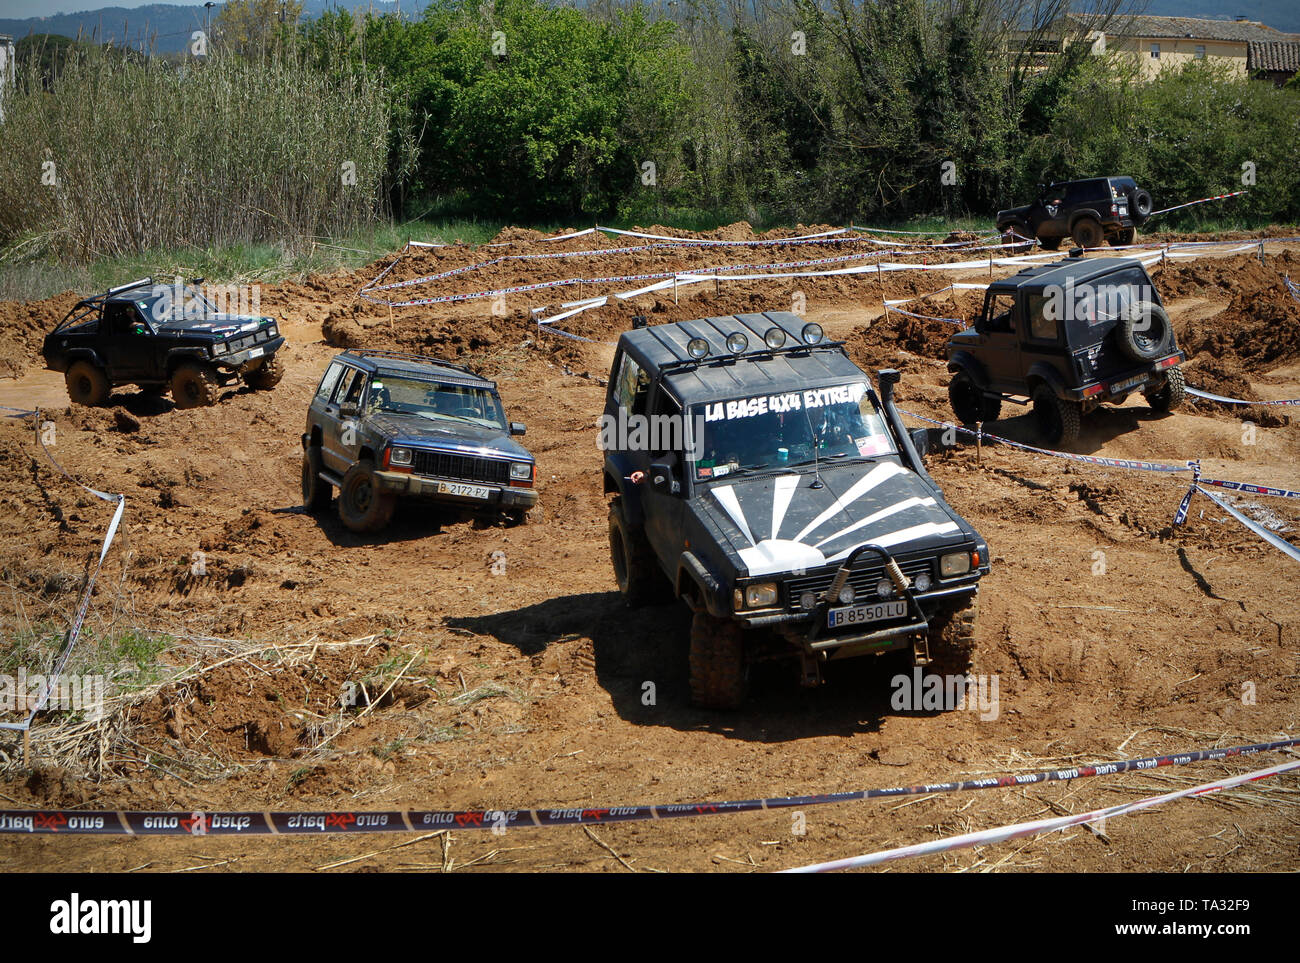 Four wheel drive cars tackling a mud circuit in Spain Stock Photo